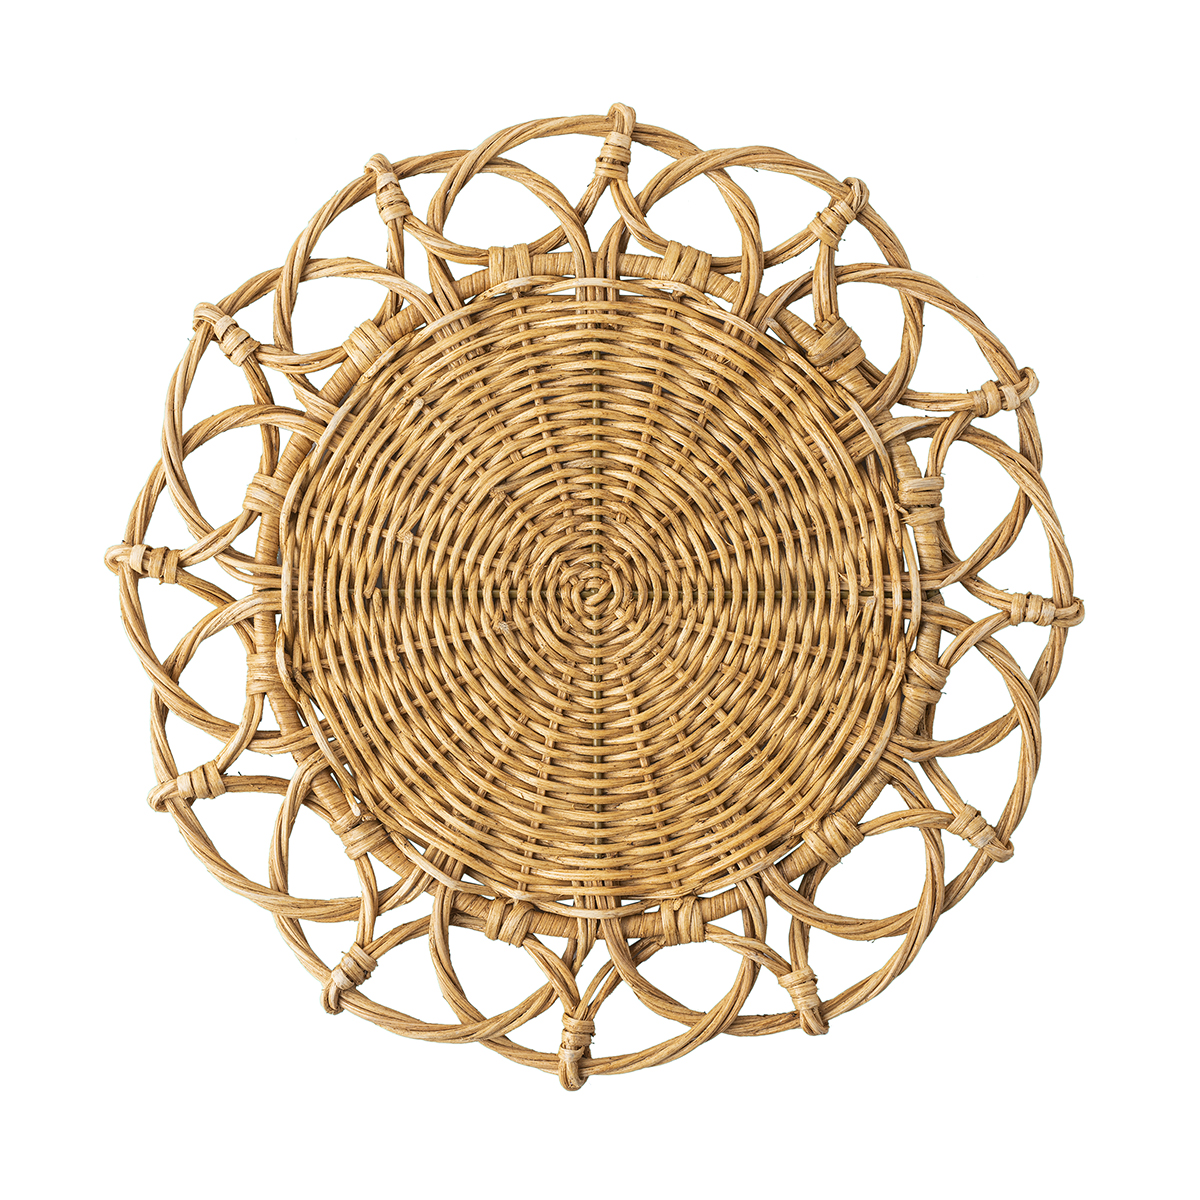 Natural woven Provence placemat made of rattan, featuring overlapping circles along the outside edge. Available at Mt. Pleasant home decor store GDC Home